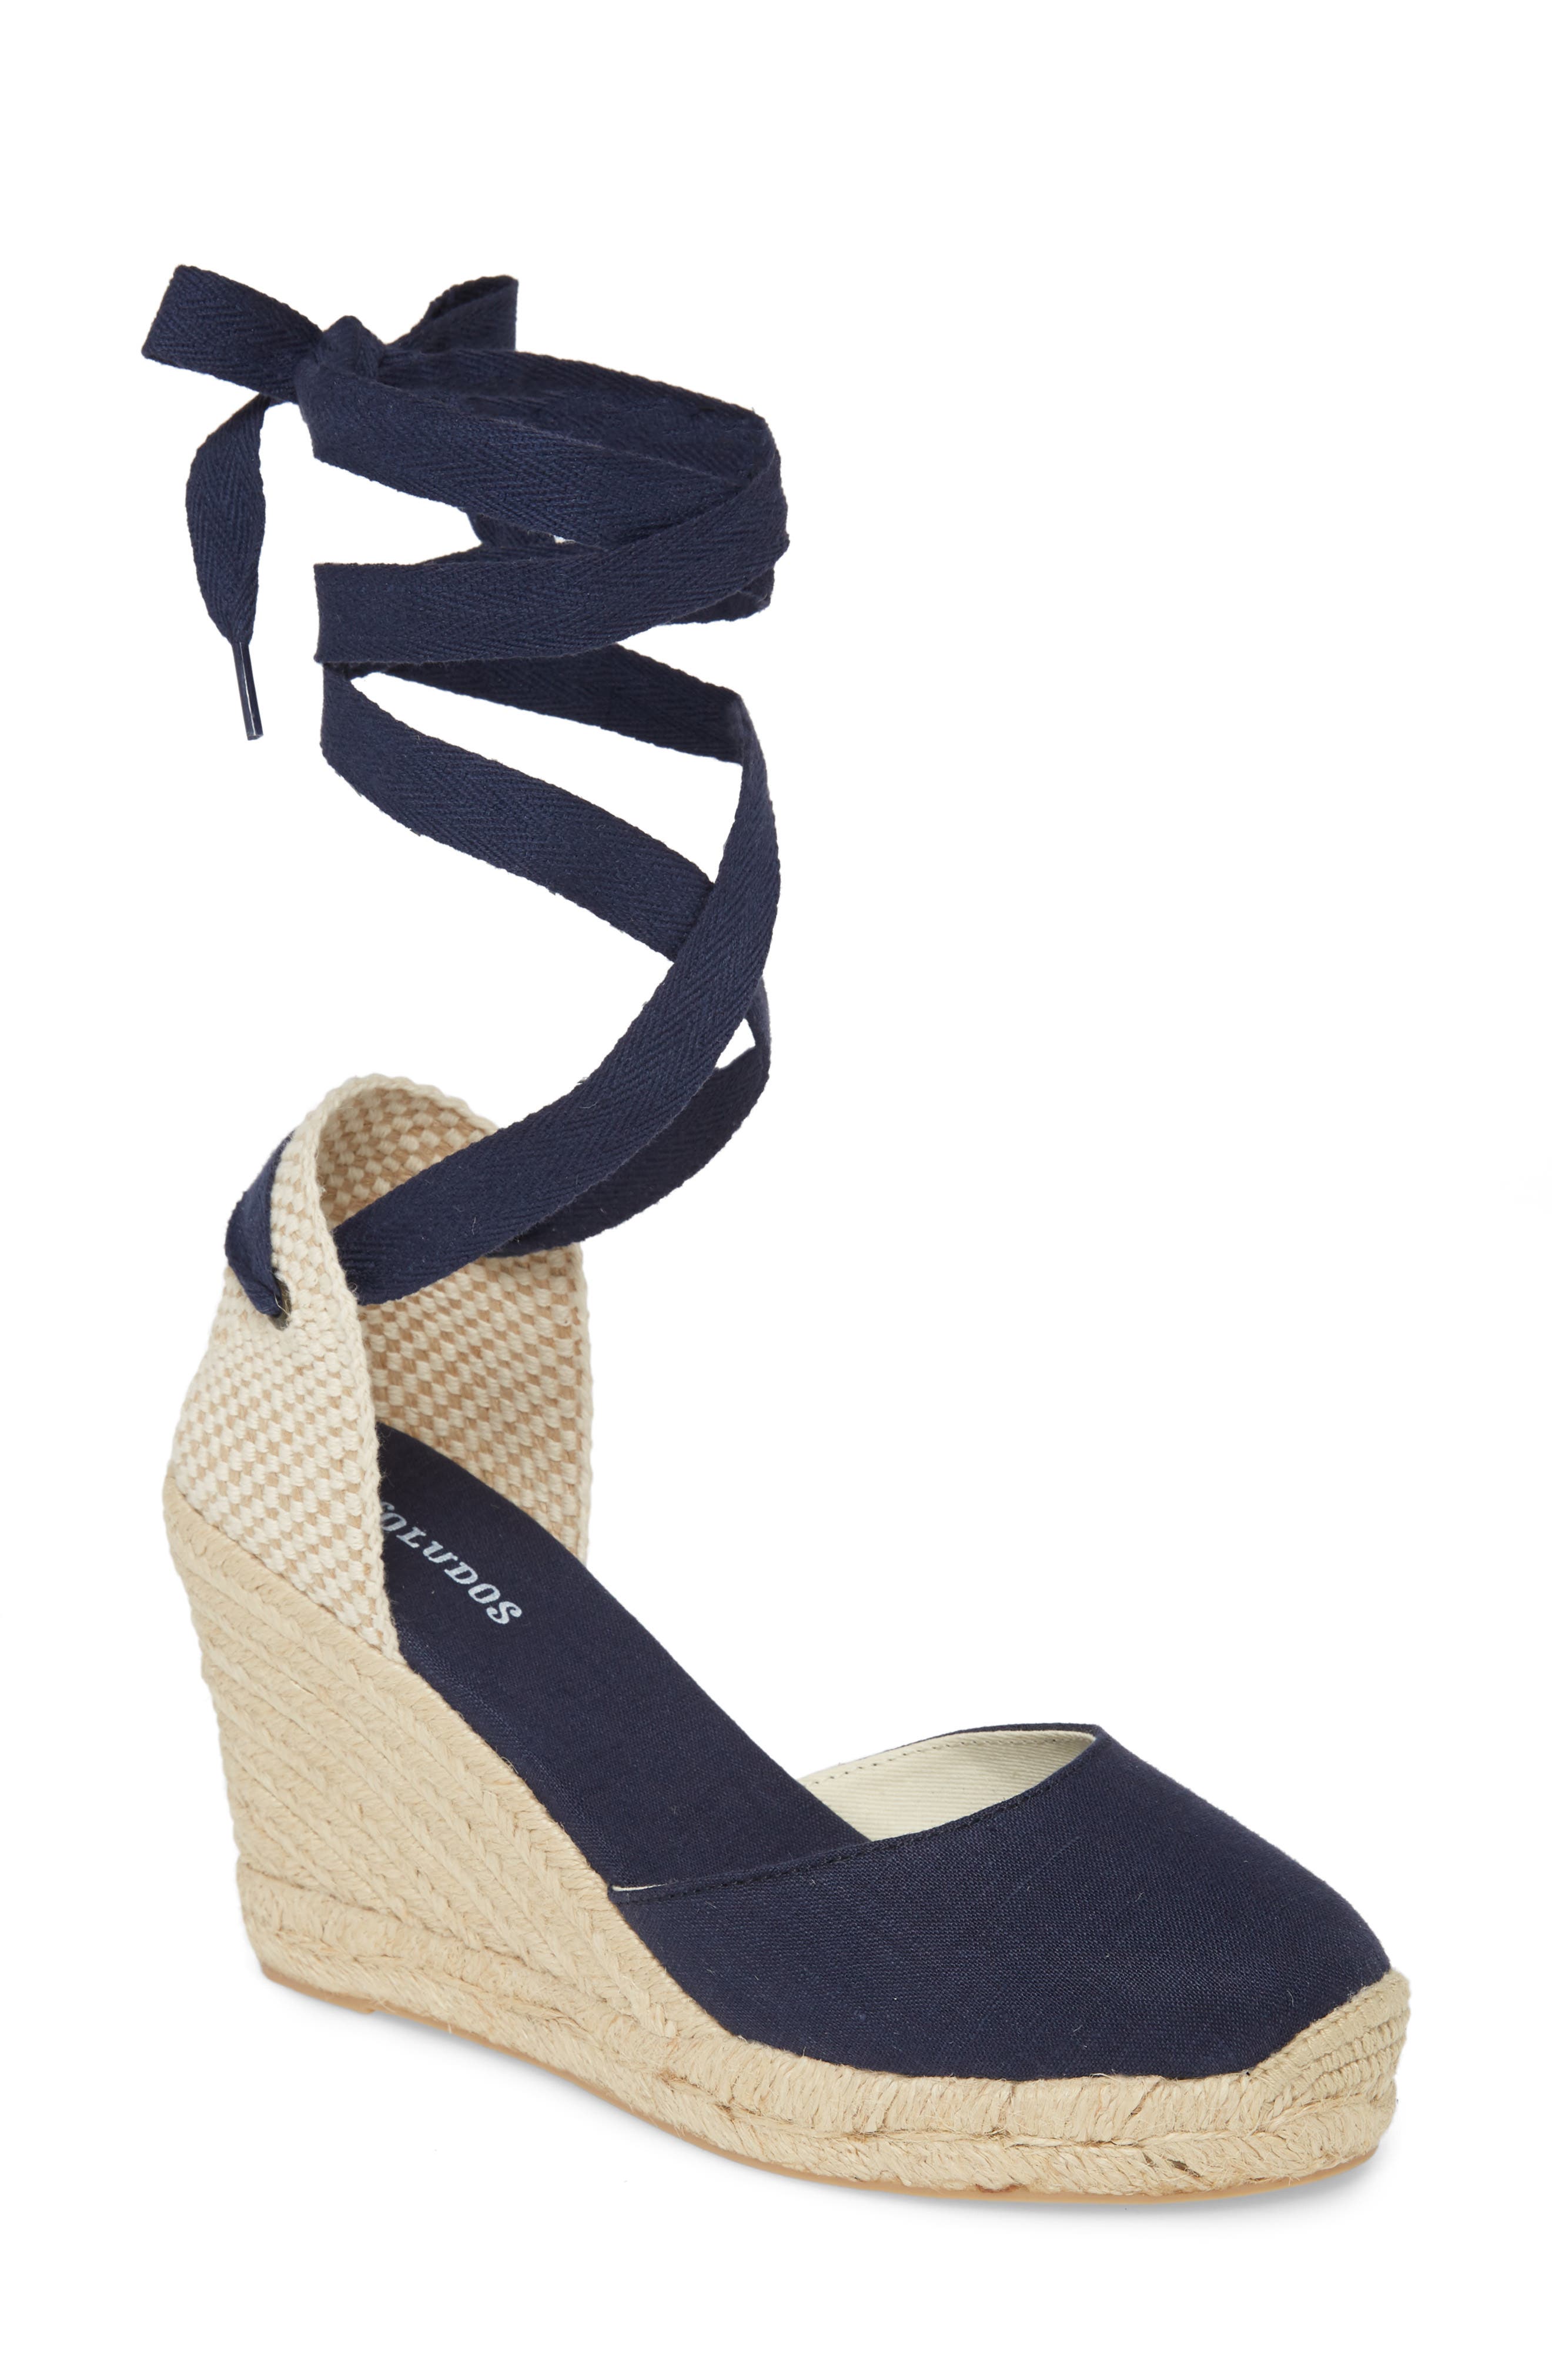 Nordstrom Women Shoes High Heels Wedges Wedge Sandals Valencia Wraparound Espadrille Wedge in Navy Fabric at Nordstrom 